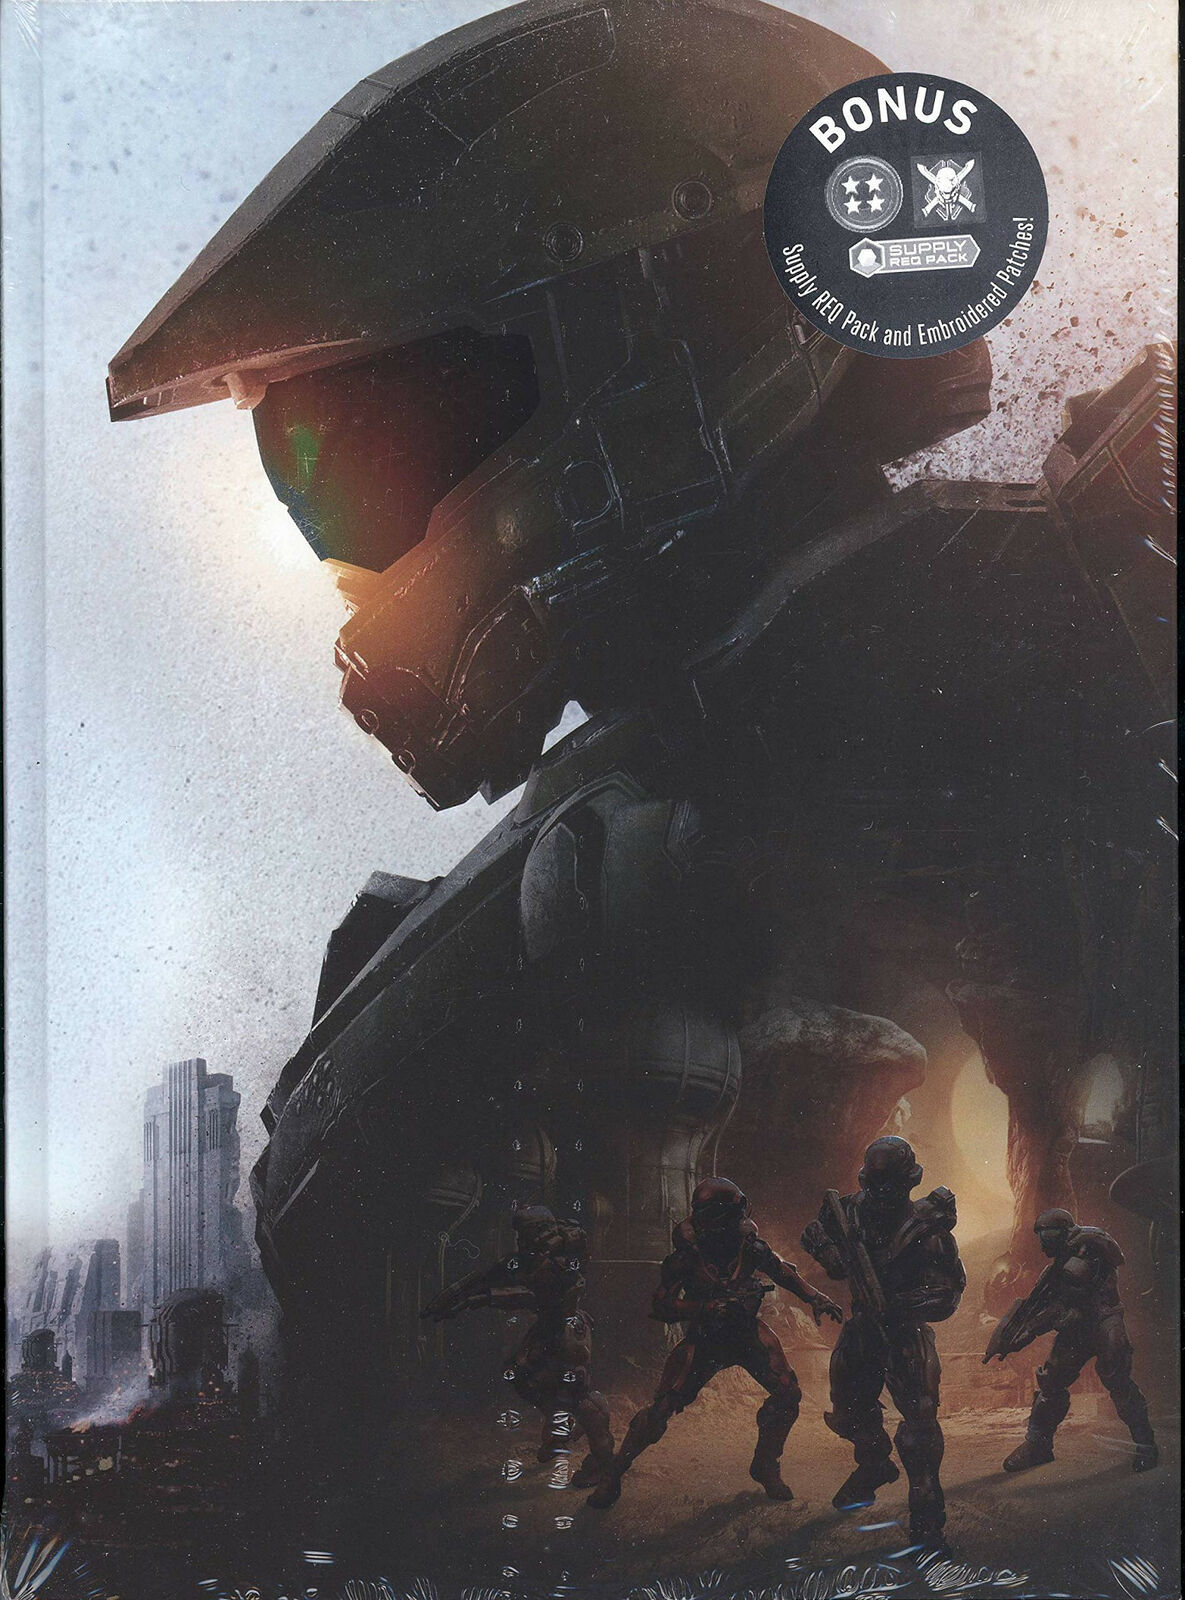 Halo 5 Guardians Prima Collectors Edition Hardcover Game Strategy Guide Art Book - $18.76